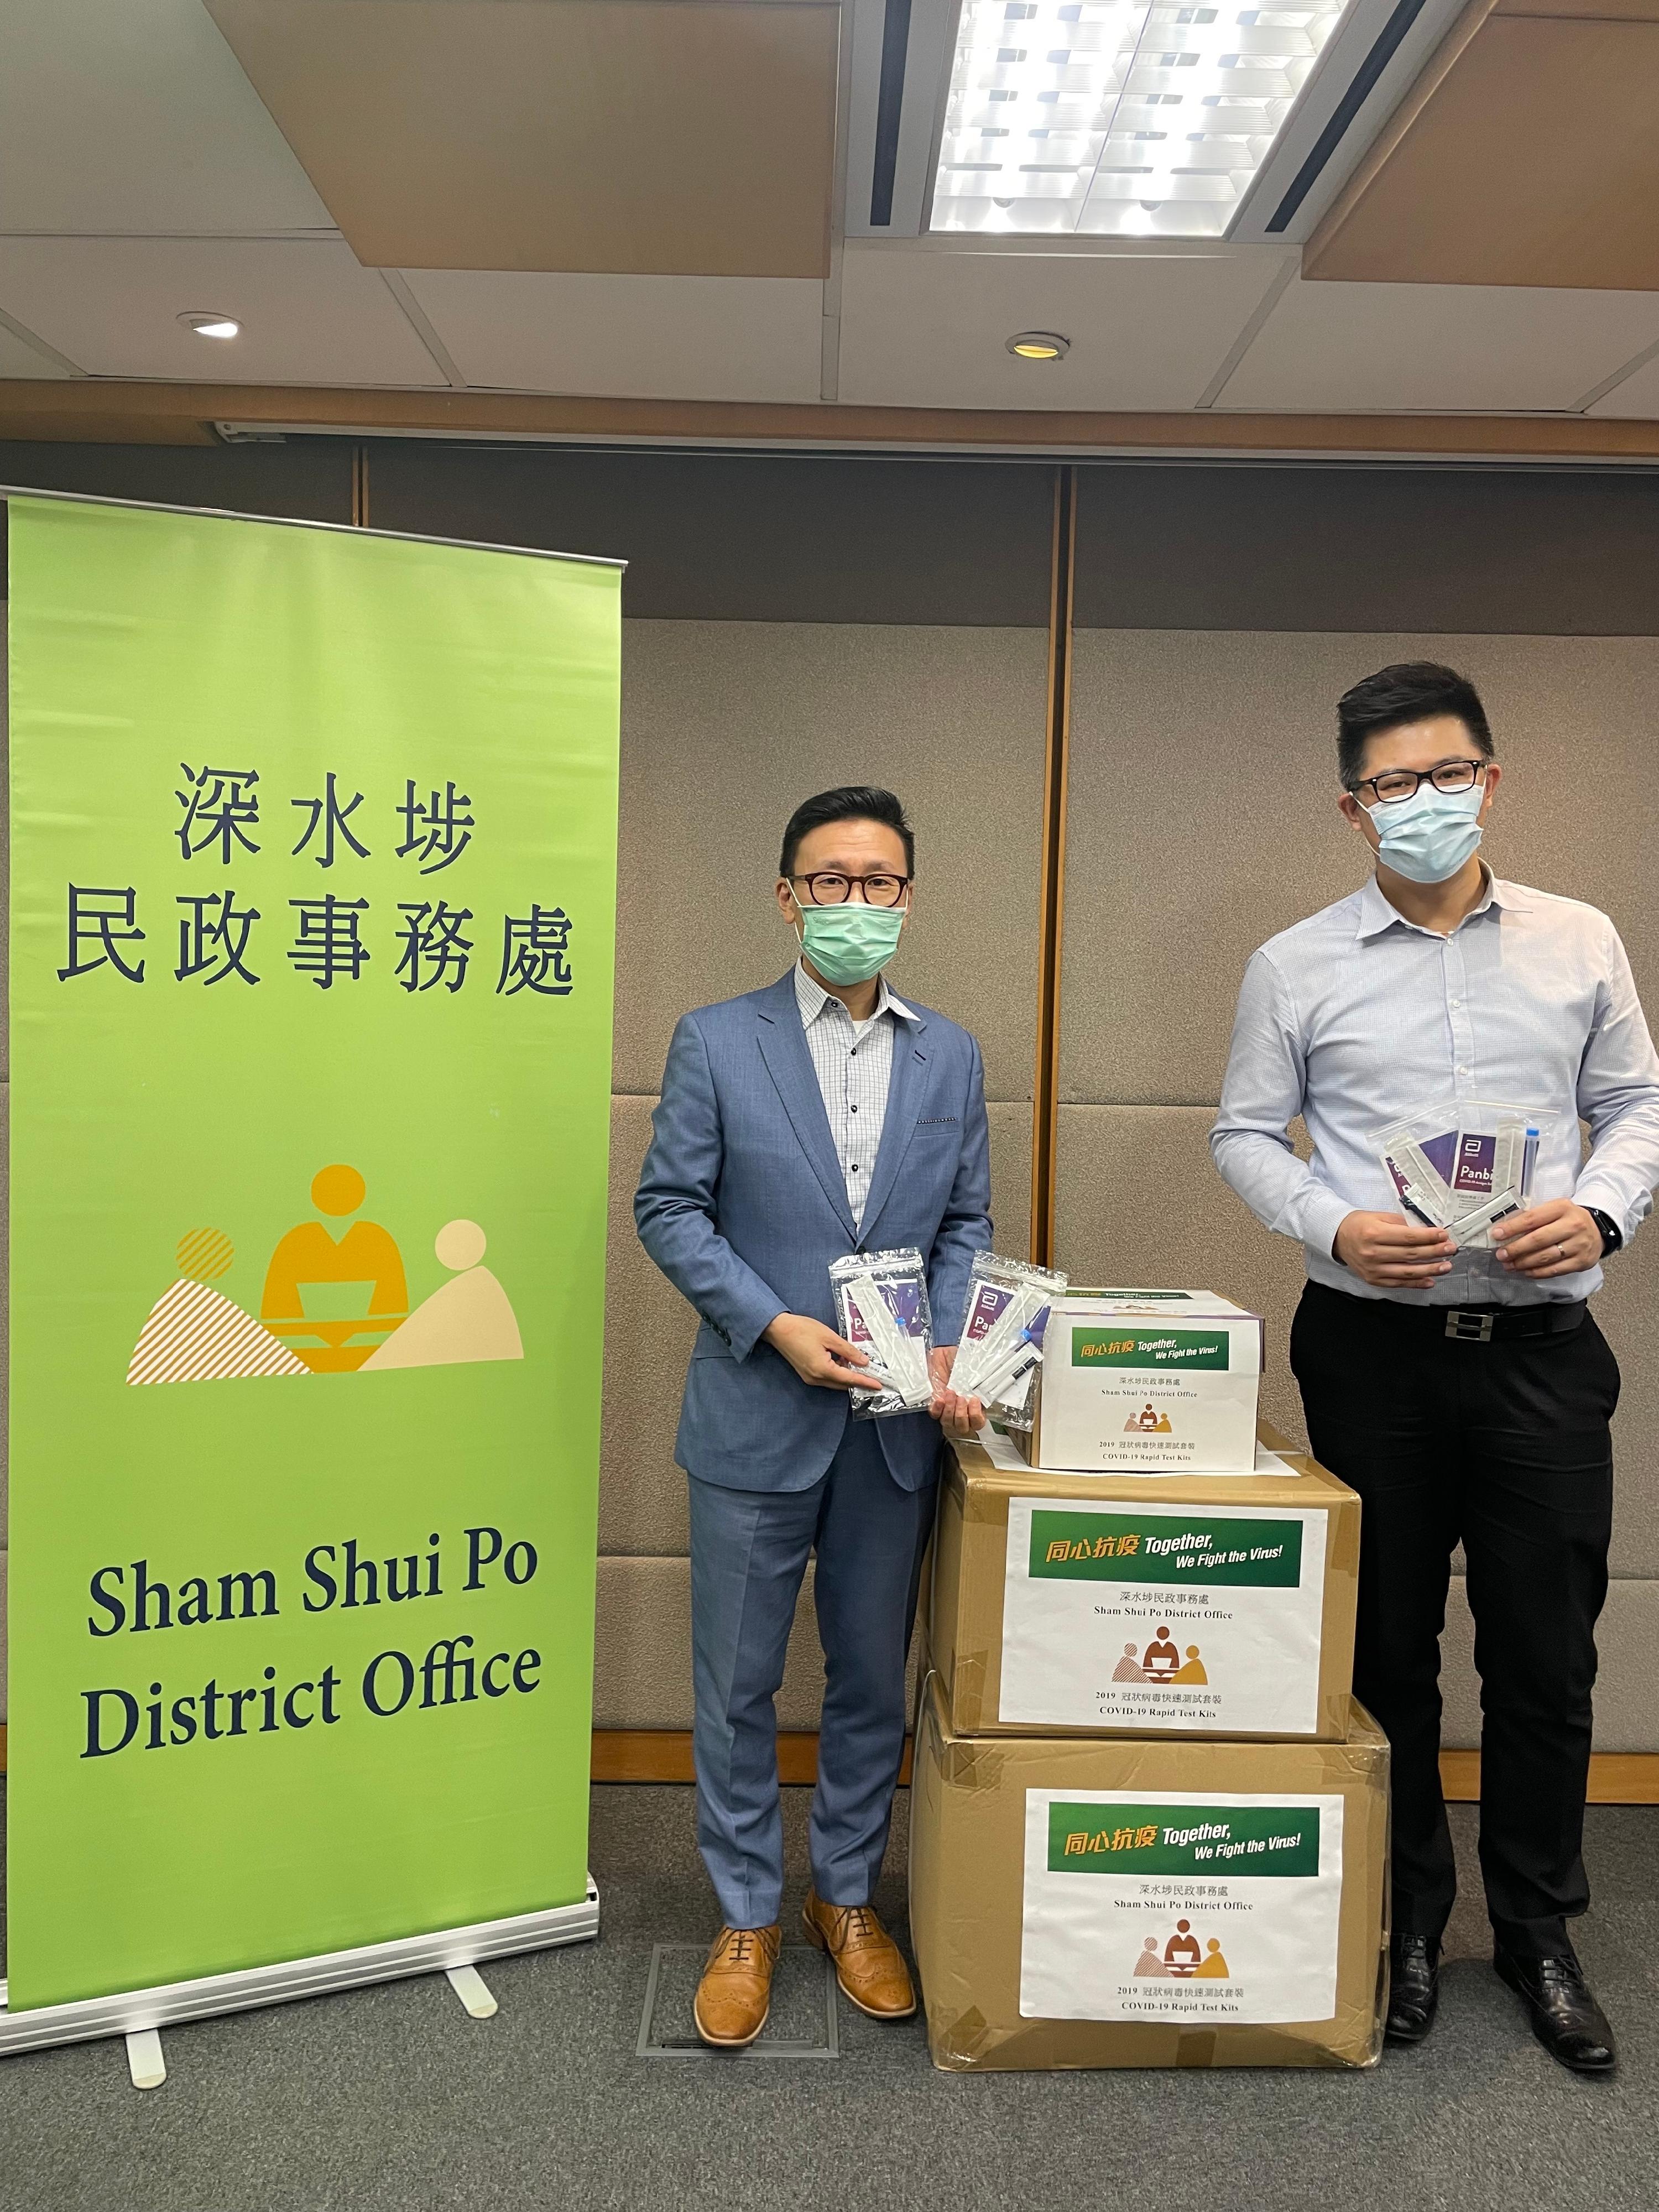 The Sham Shui Po District Office today (June 20) distributed COVID-19 rapid test kits to households, cleansing workers and property management staff living and working in One West Kowloon for voluntary testing through the property management company and the owners' corporation.